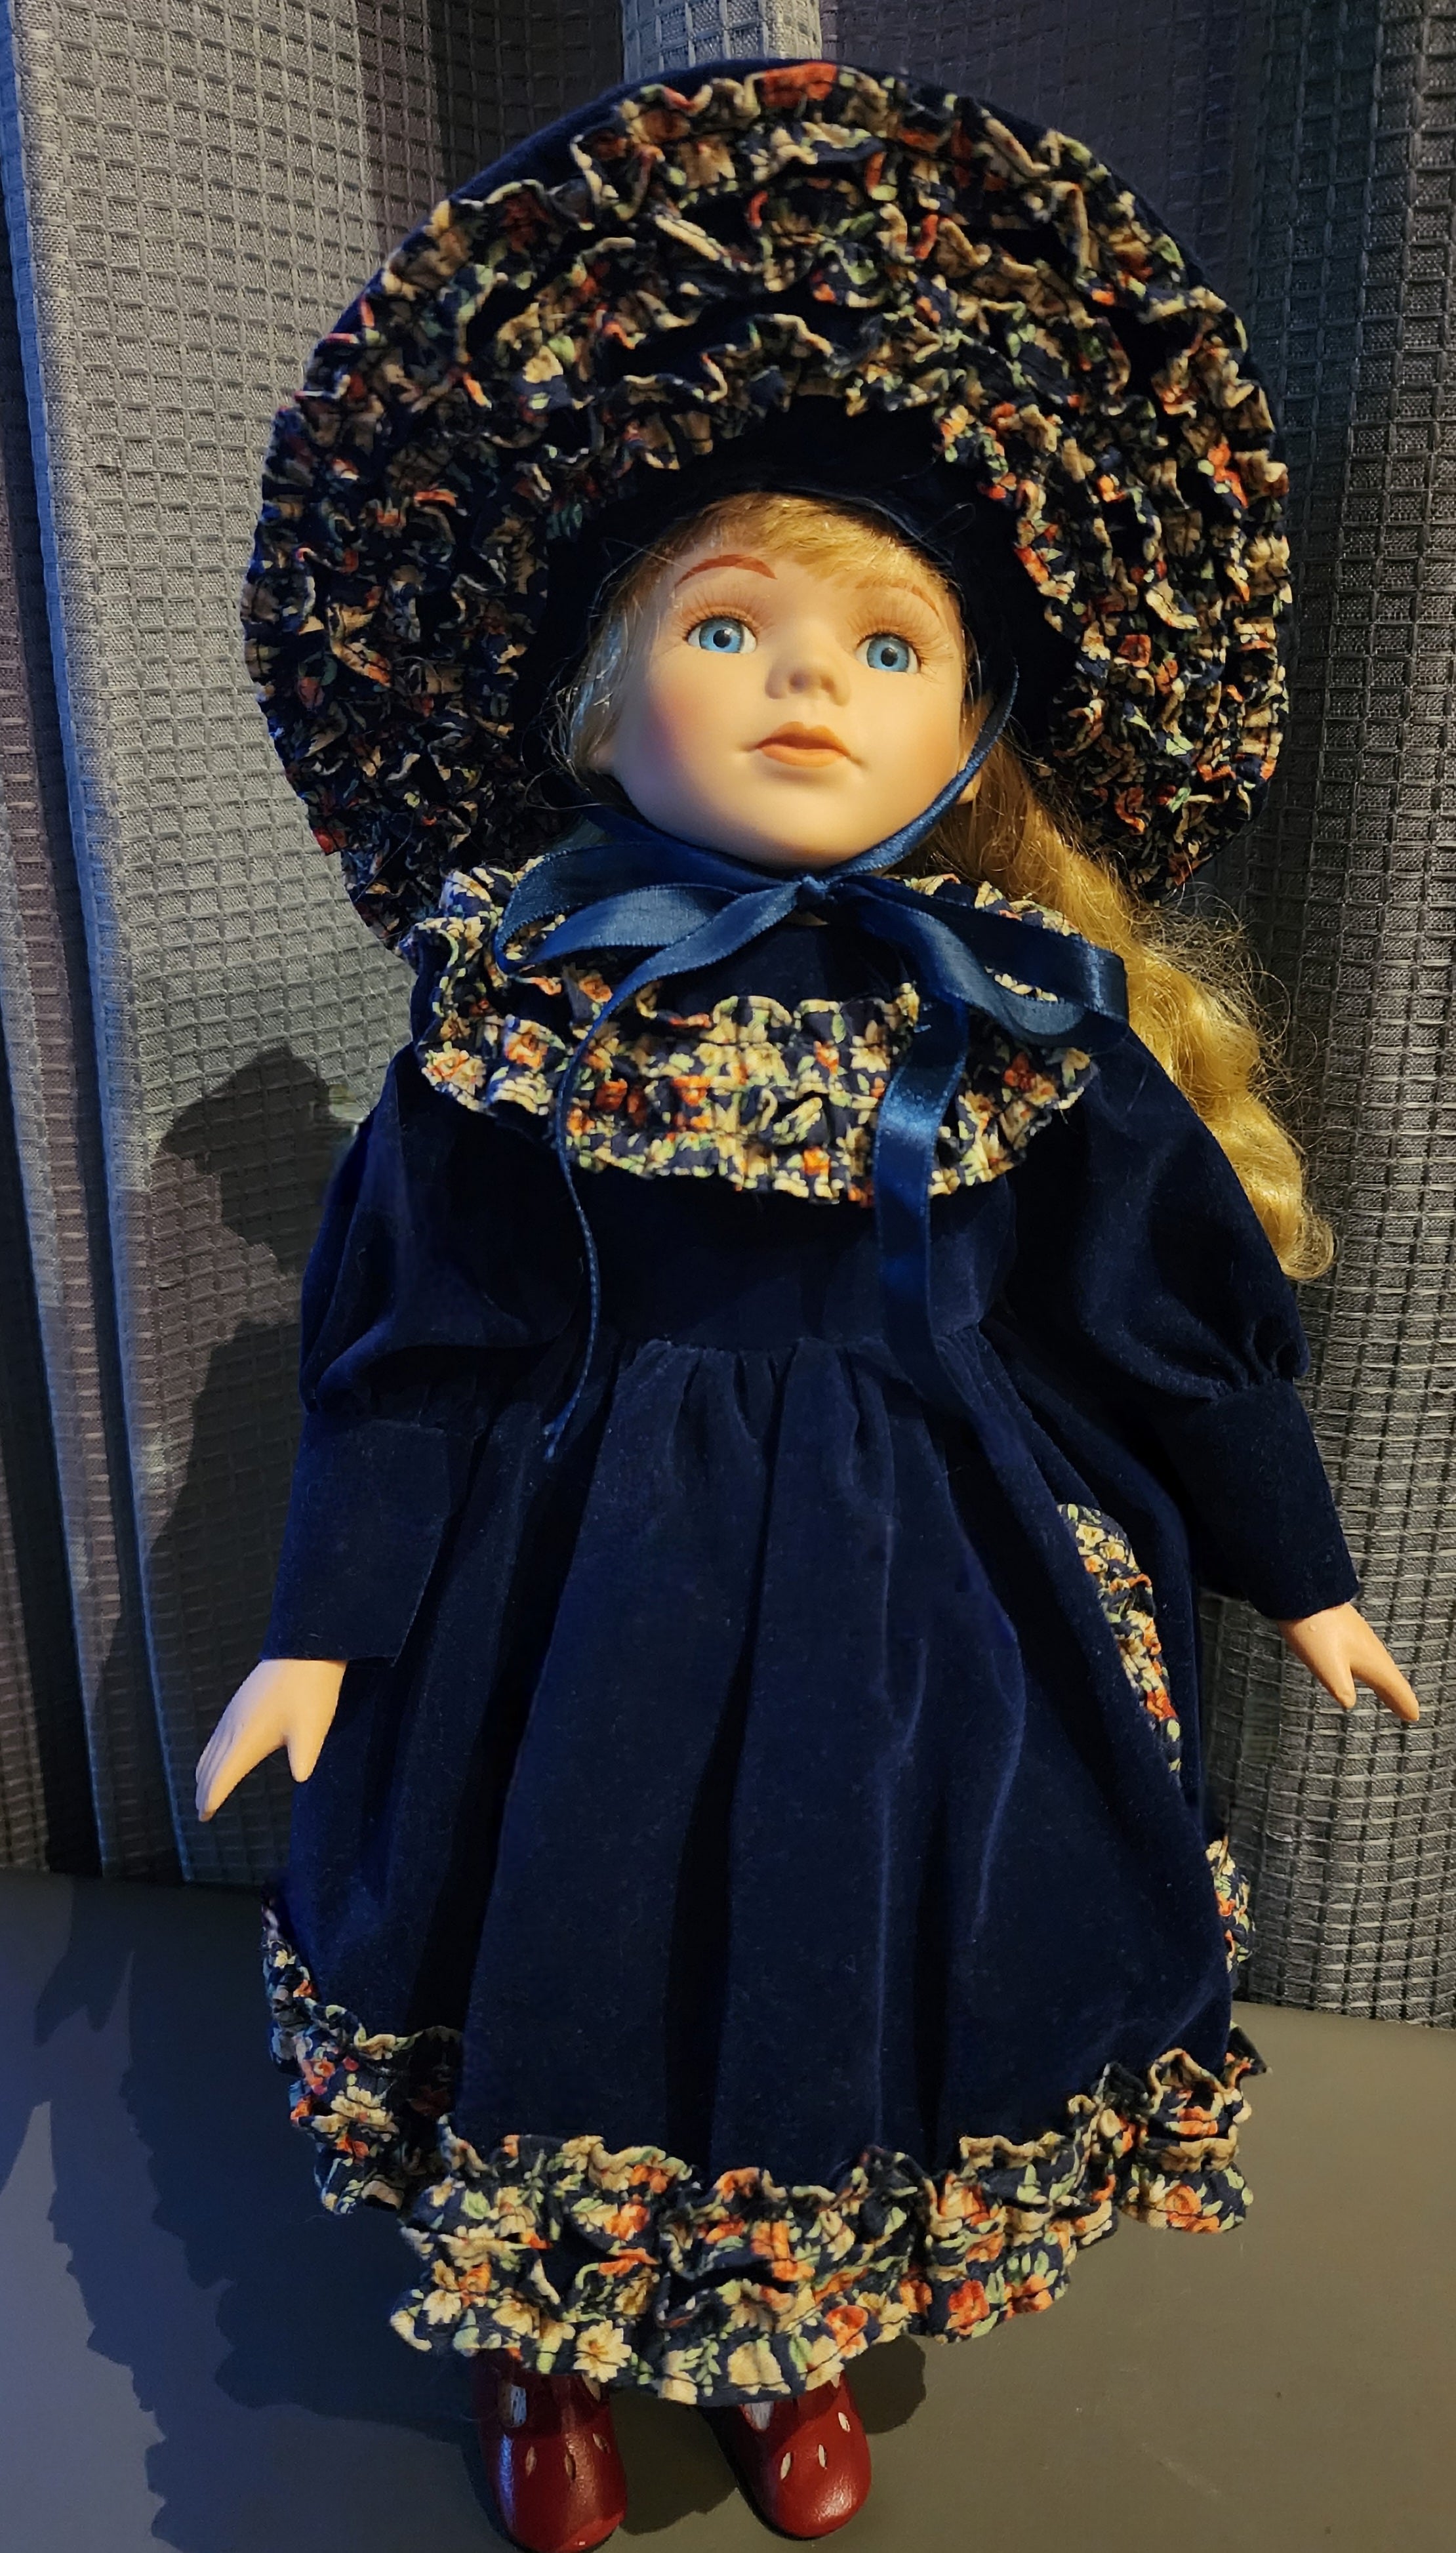 X - Adopted! Arcturian Star Seed Spirit GLORIA - Porcelain Doll Vessel